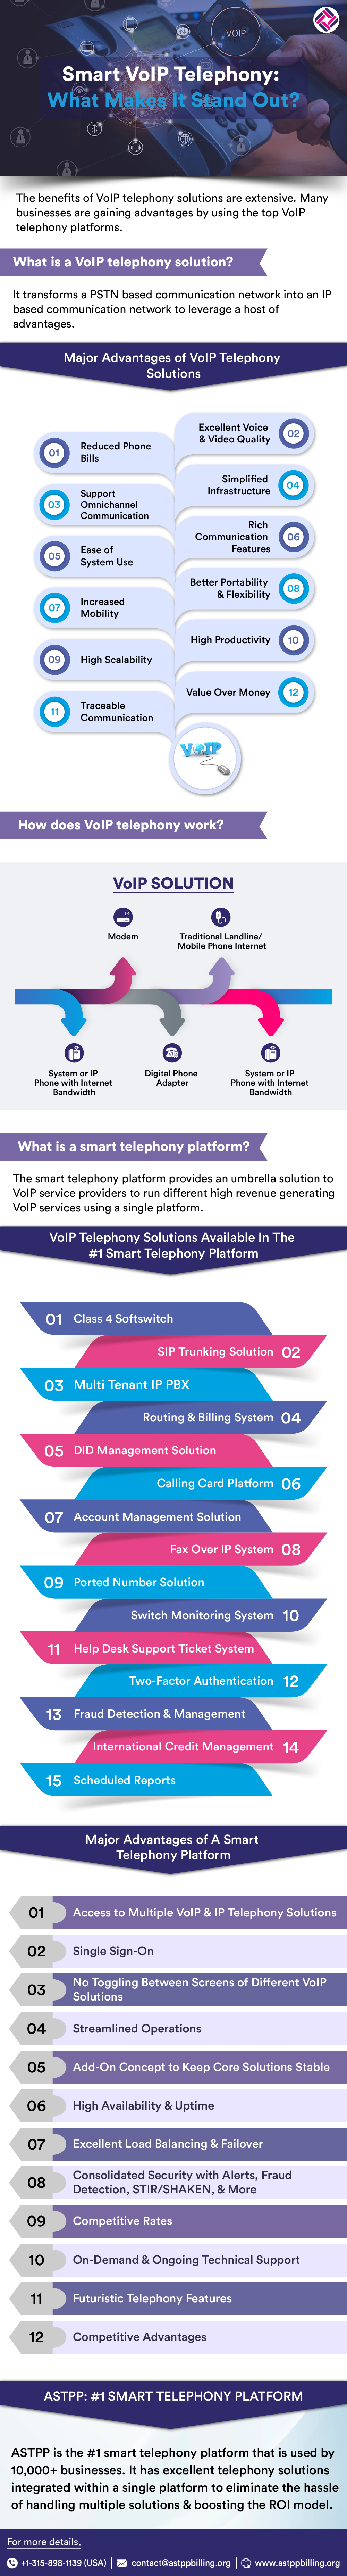 Smart VoIP Telephony What's Makes It Stand Out